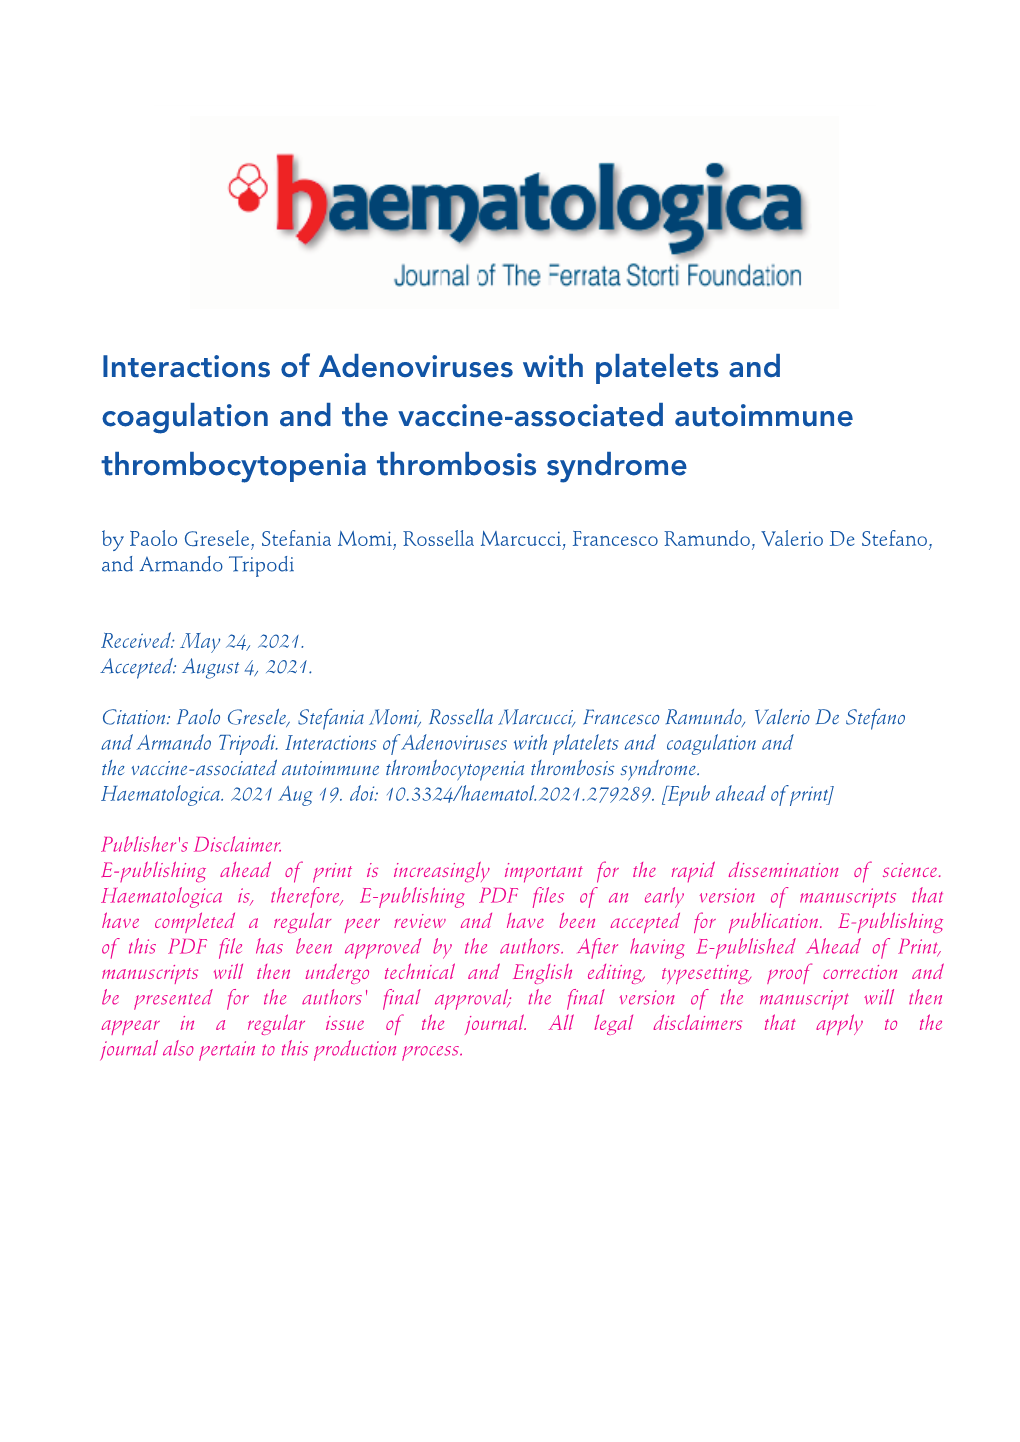 Interactions of Adenoviruses with Platelets and Coagulation and The